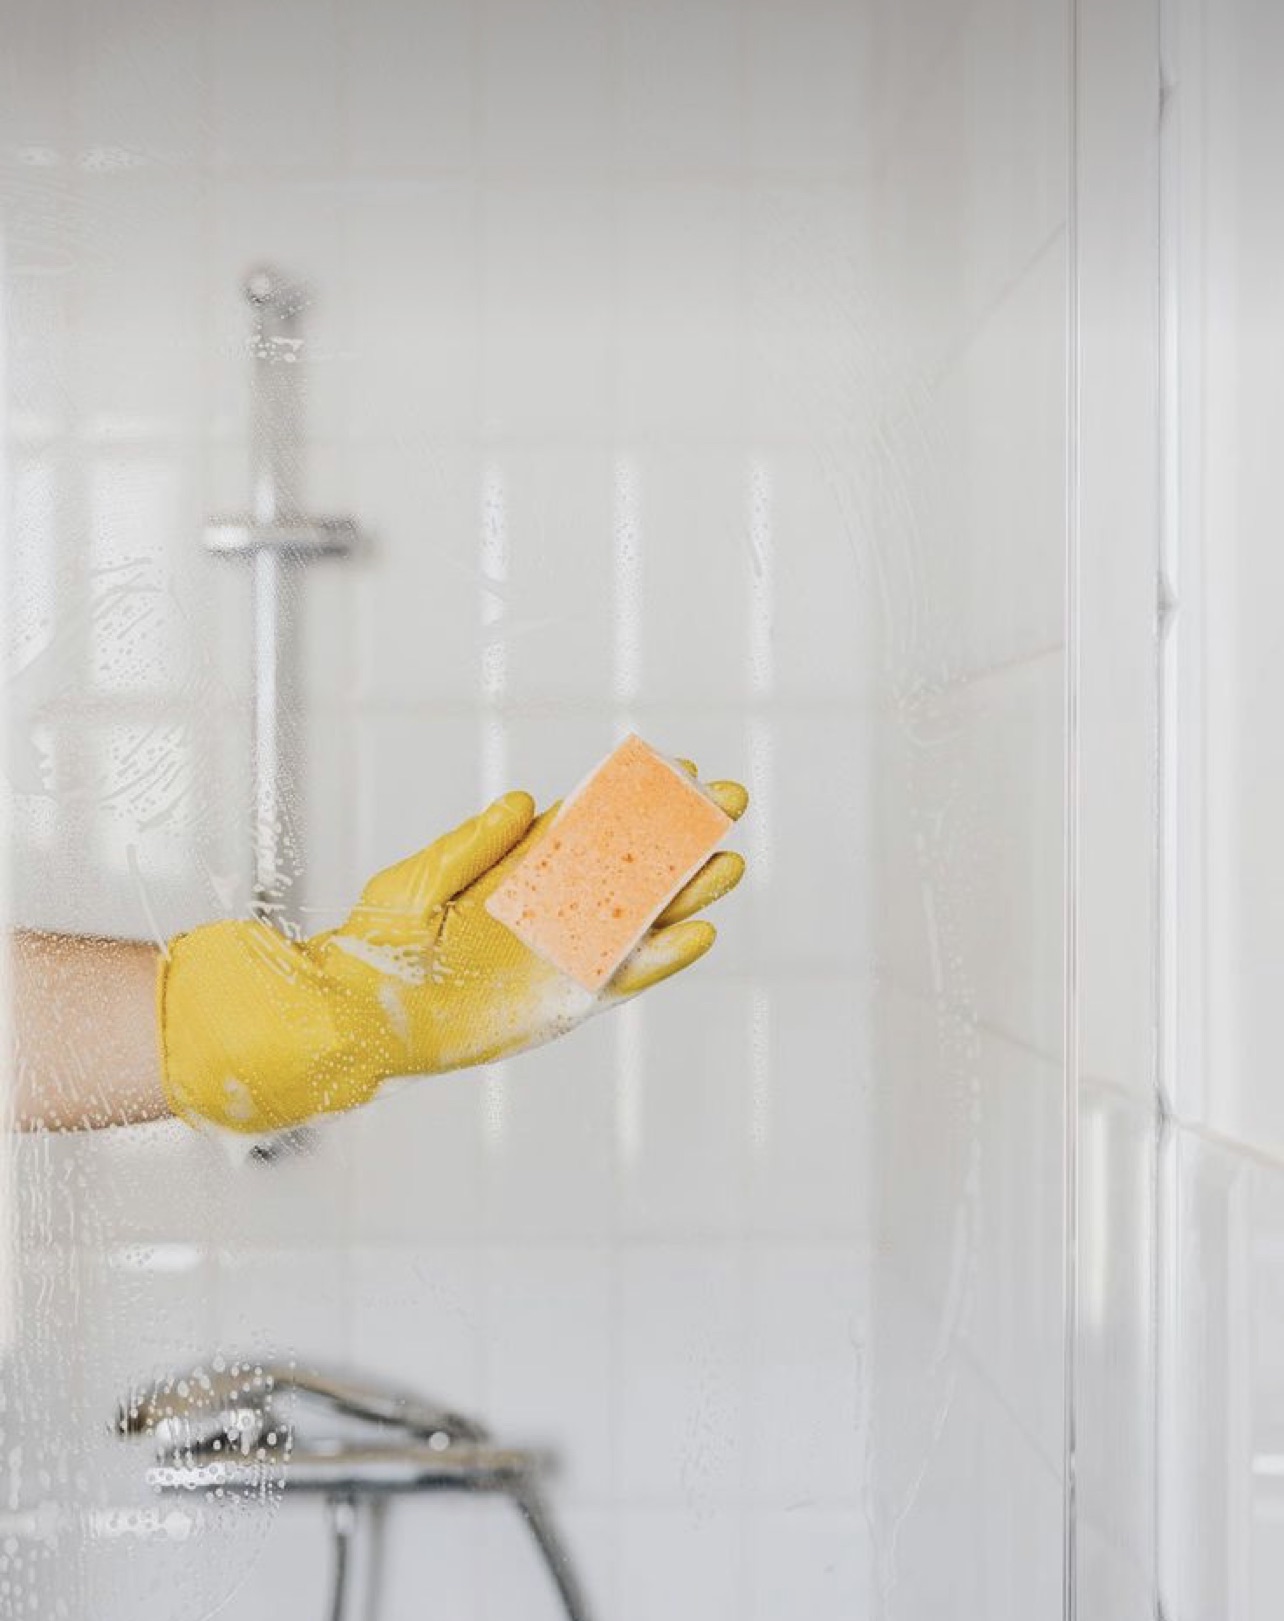 Tips to Clean and Maintain Glass Tiles